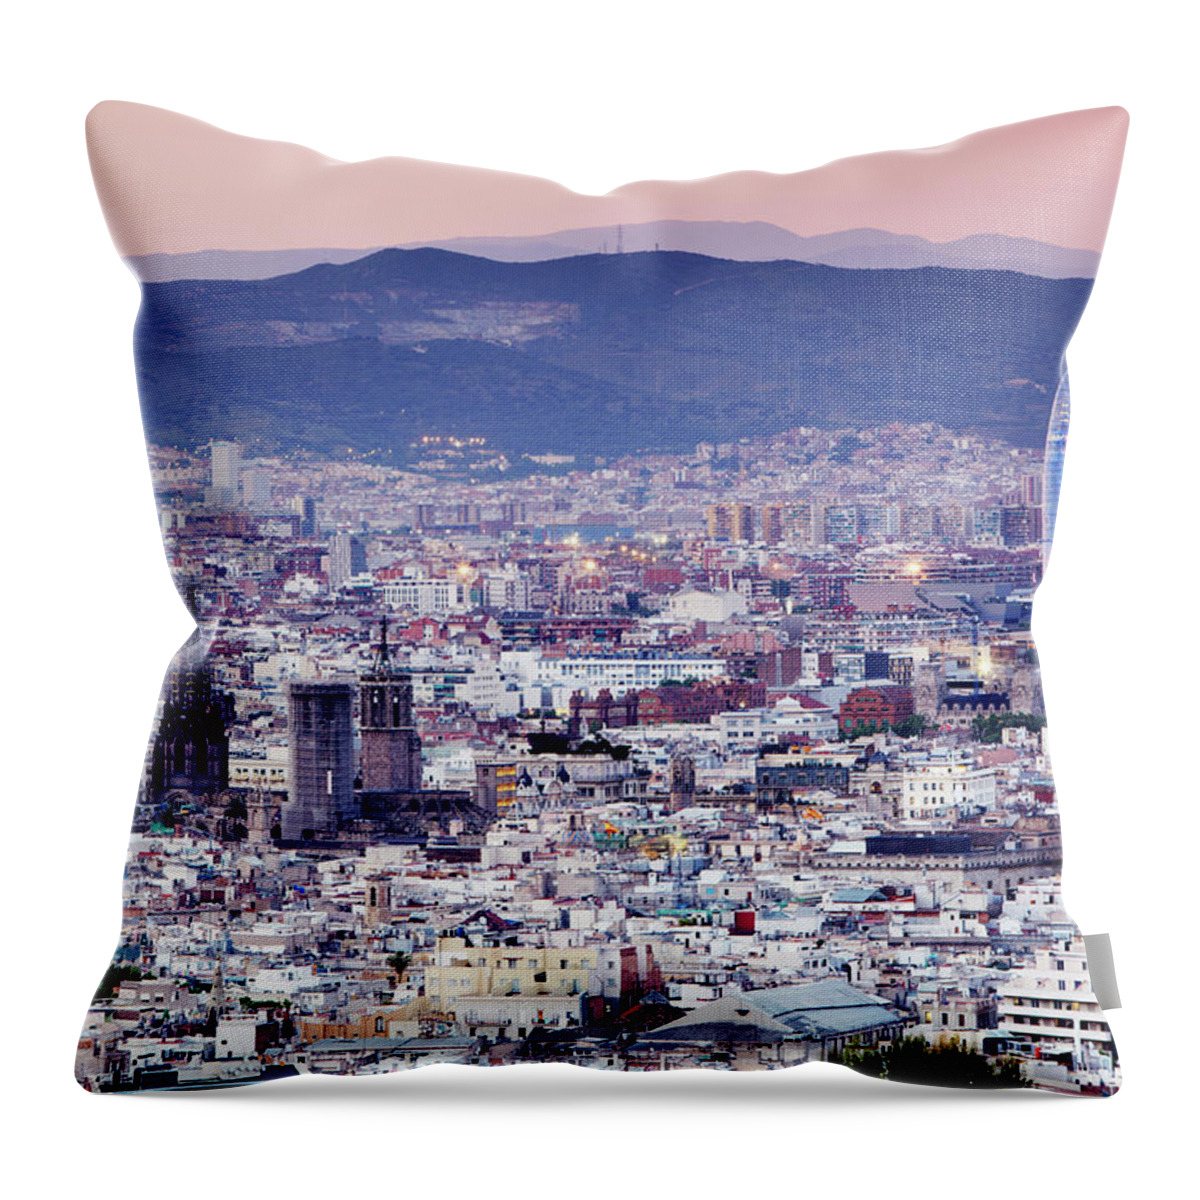 Catalonia Throw Pillow featuring the photograph View Over Barcelona by Allan Baxter